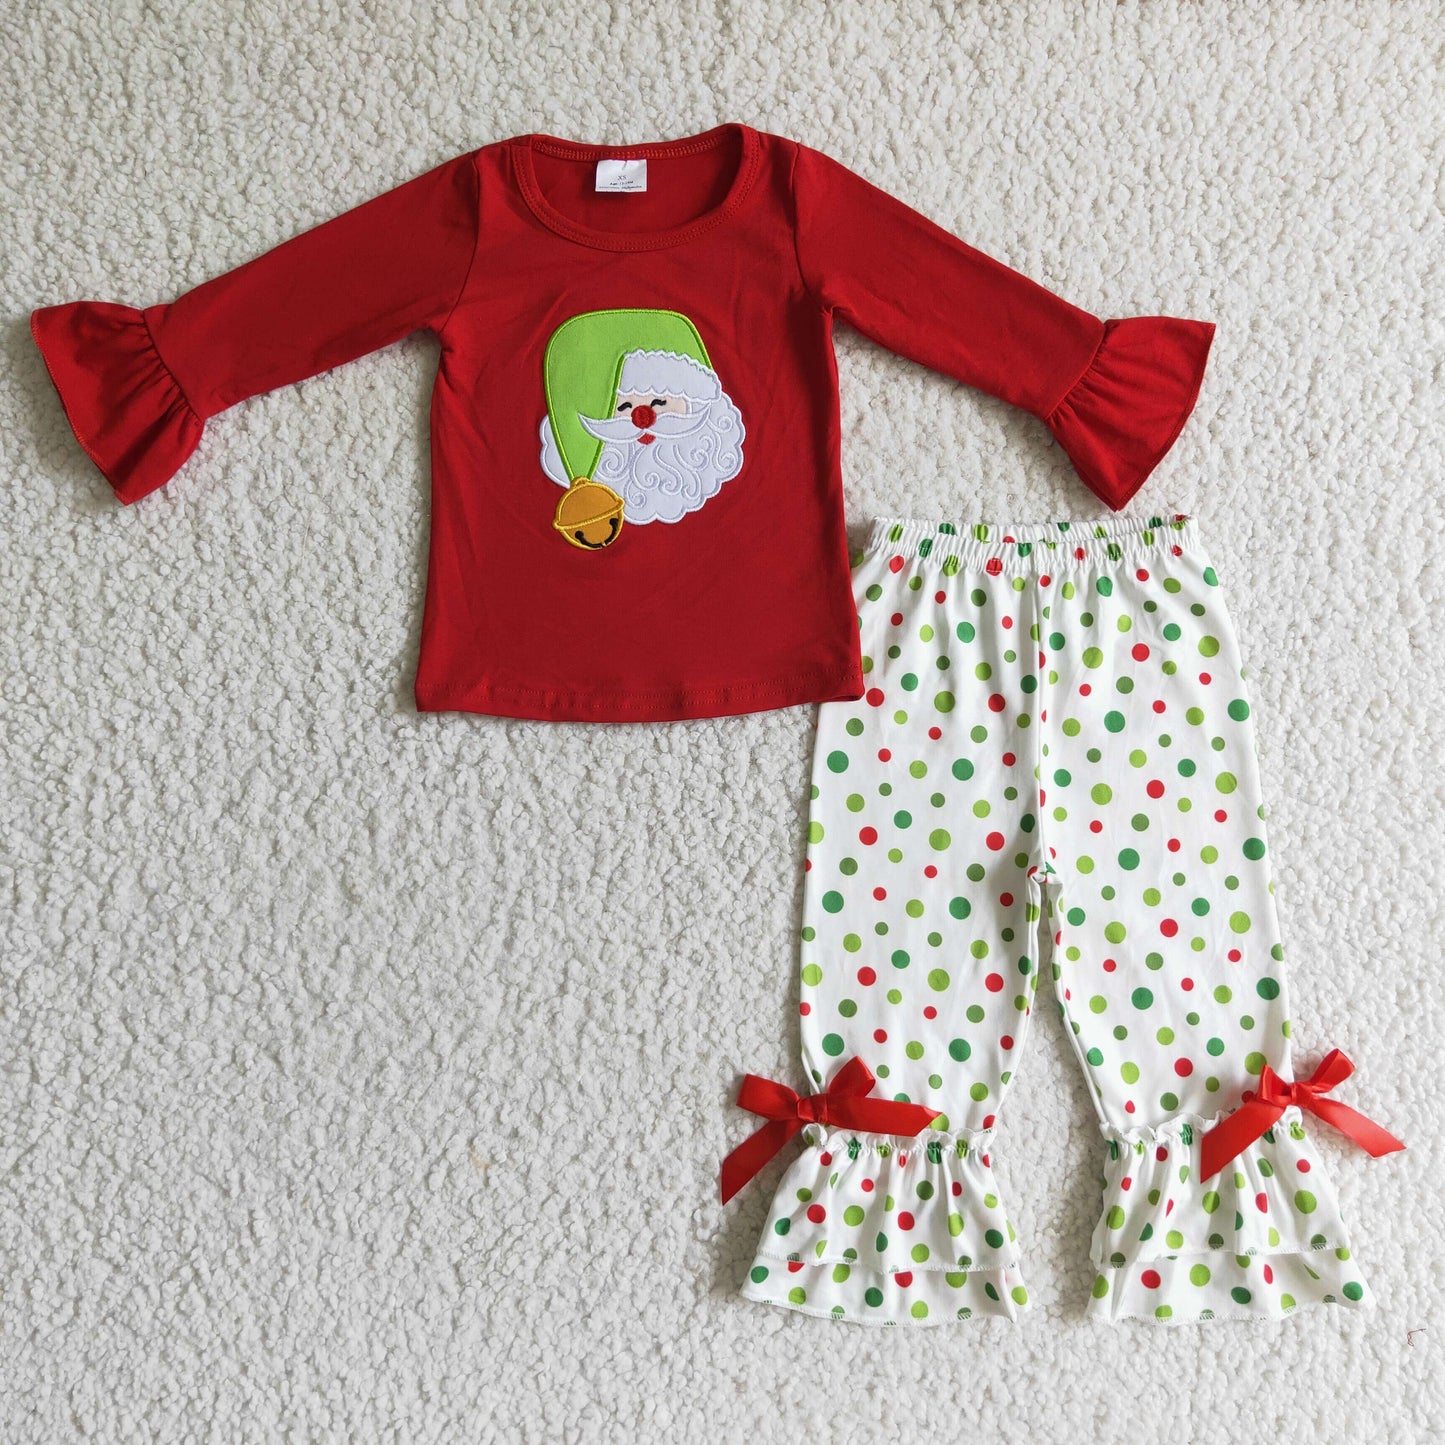 Girls embroidery Santa Claus design outfit